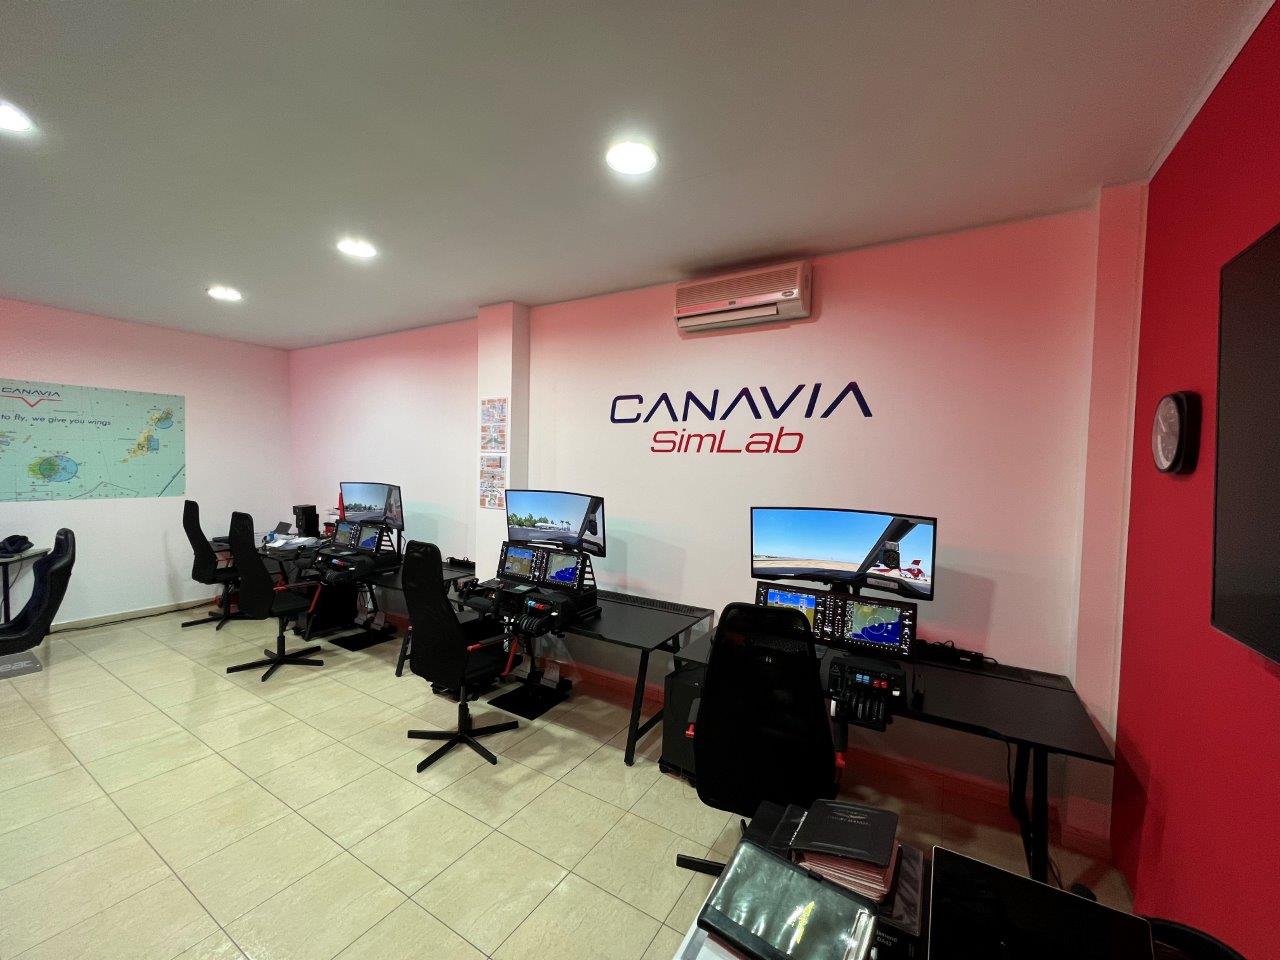 Canavia launches its SimLab!